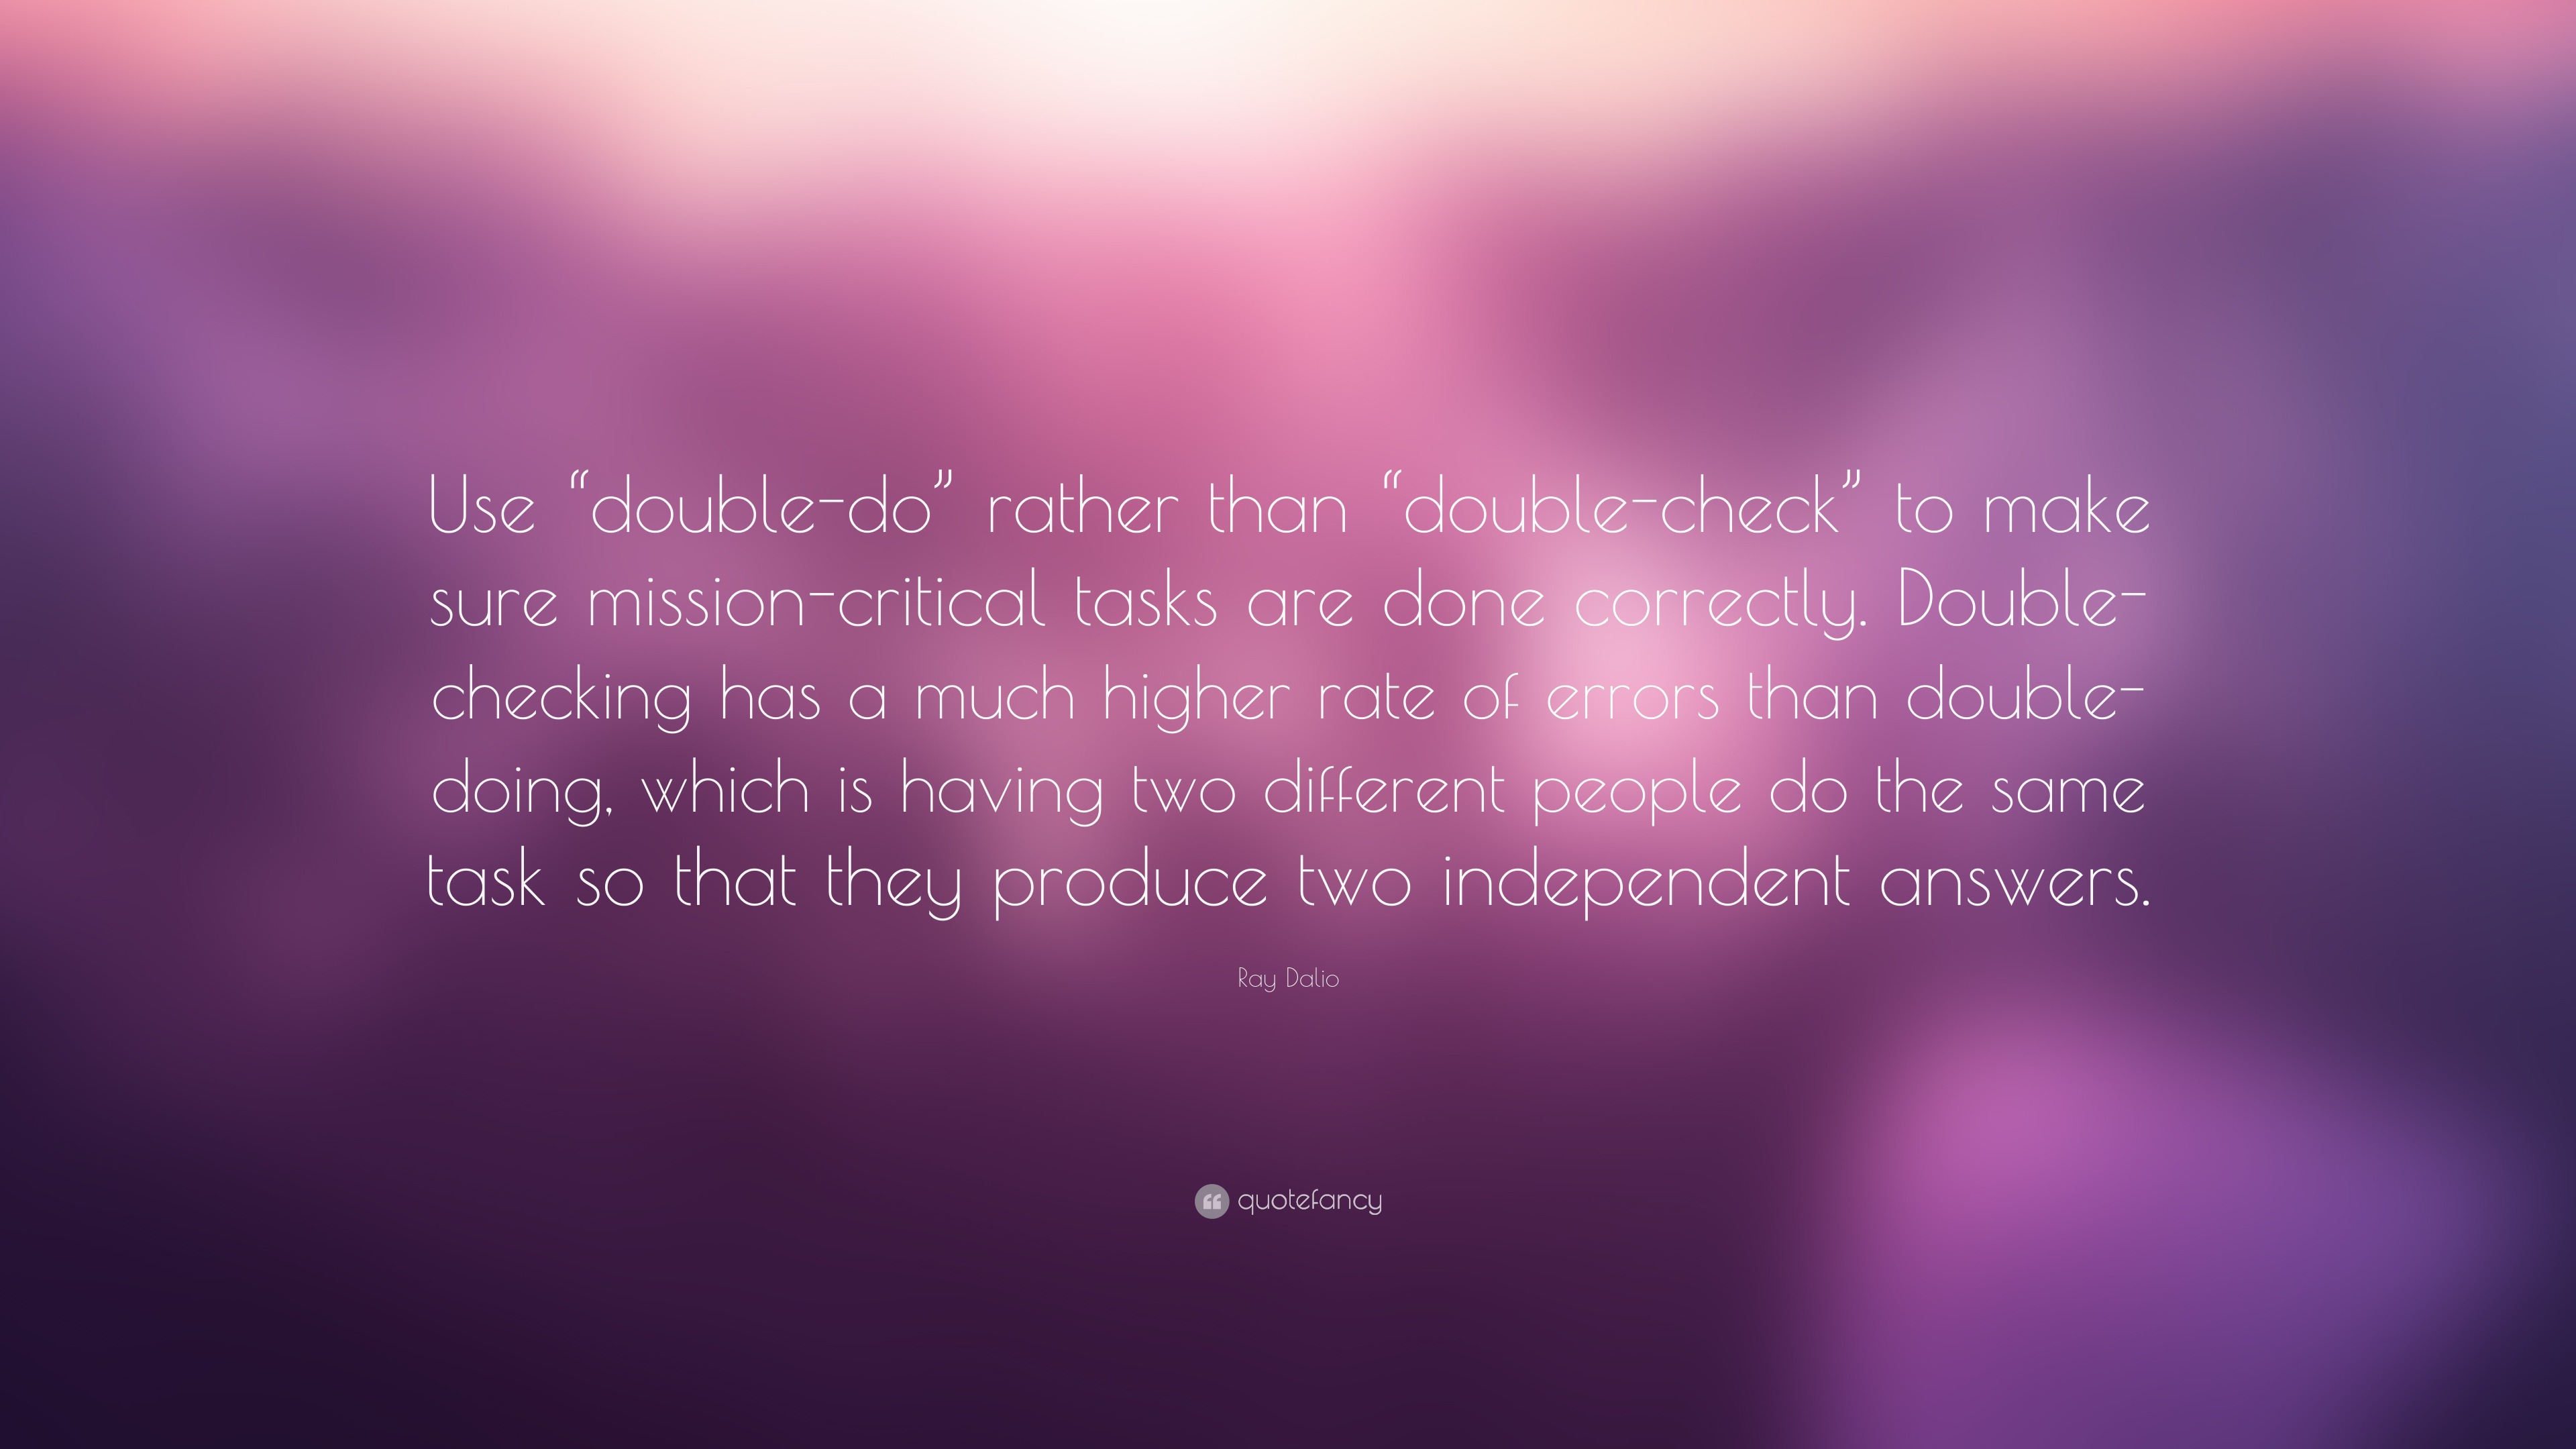 https://quotefancy.com/media/wallpaper/3840x2160/7461393-Ray-Dalio-Quote-Use-double-do-rather-than-double-check-to-make.jpg